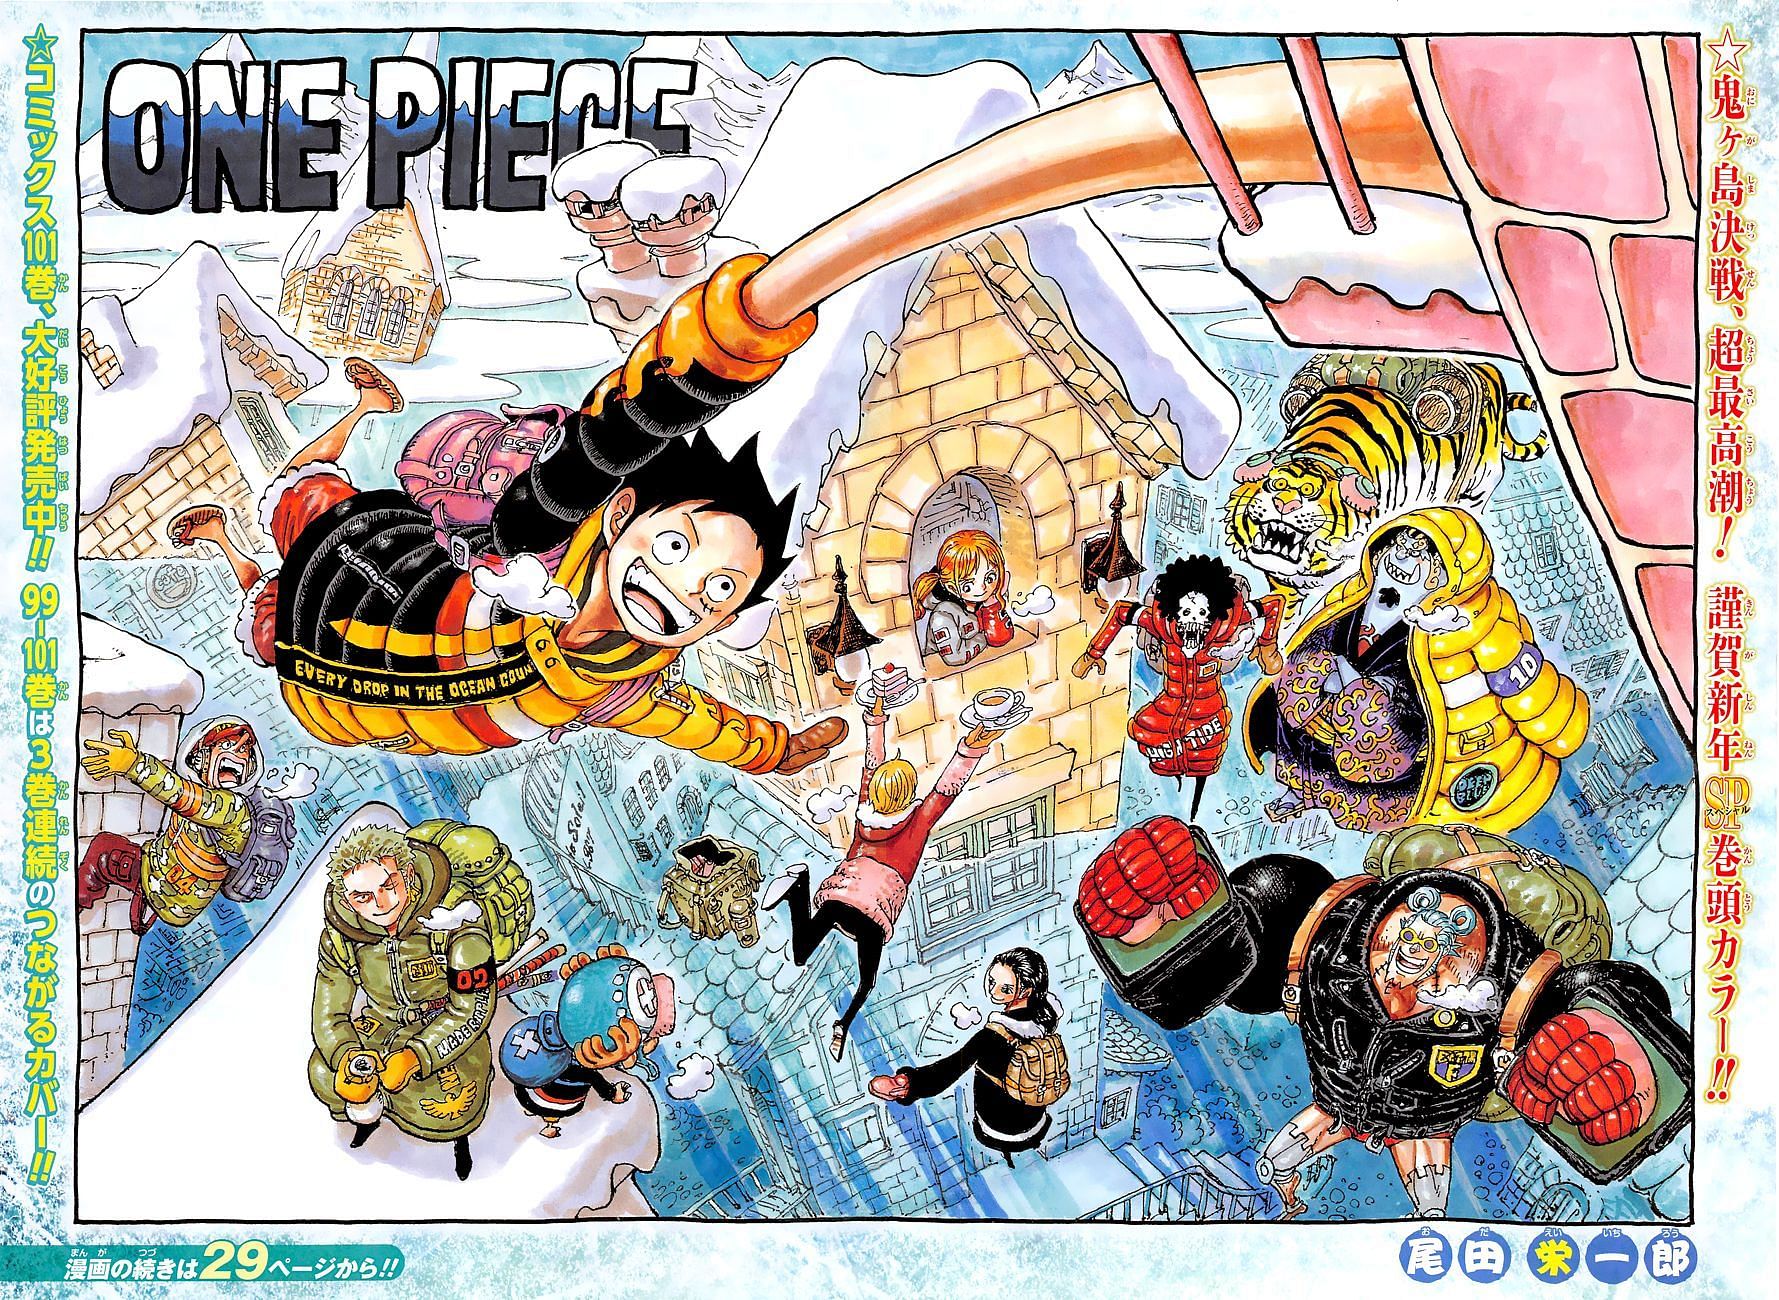 One Piece Chapter 1036 5 Things Most People Missed